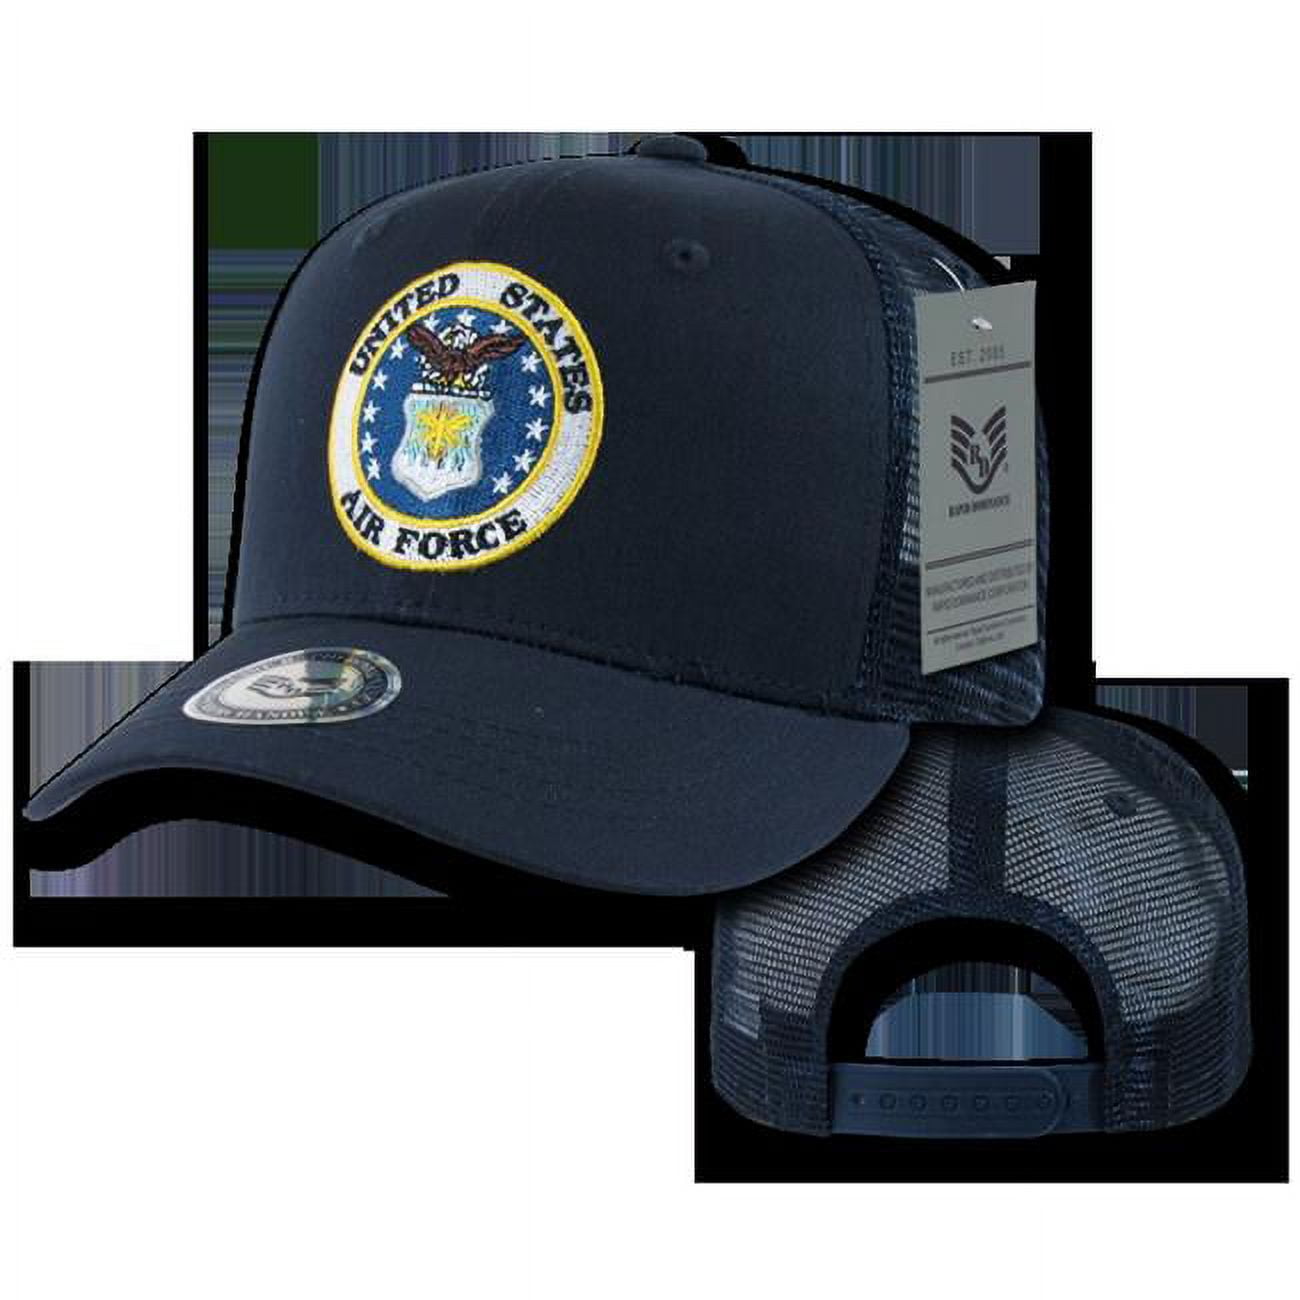 Rapid Dominance S77-AIR-NVY Back to the Basics Mesh Air Force Cap, Navy